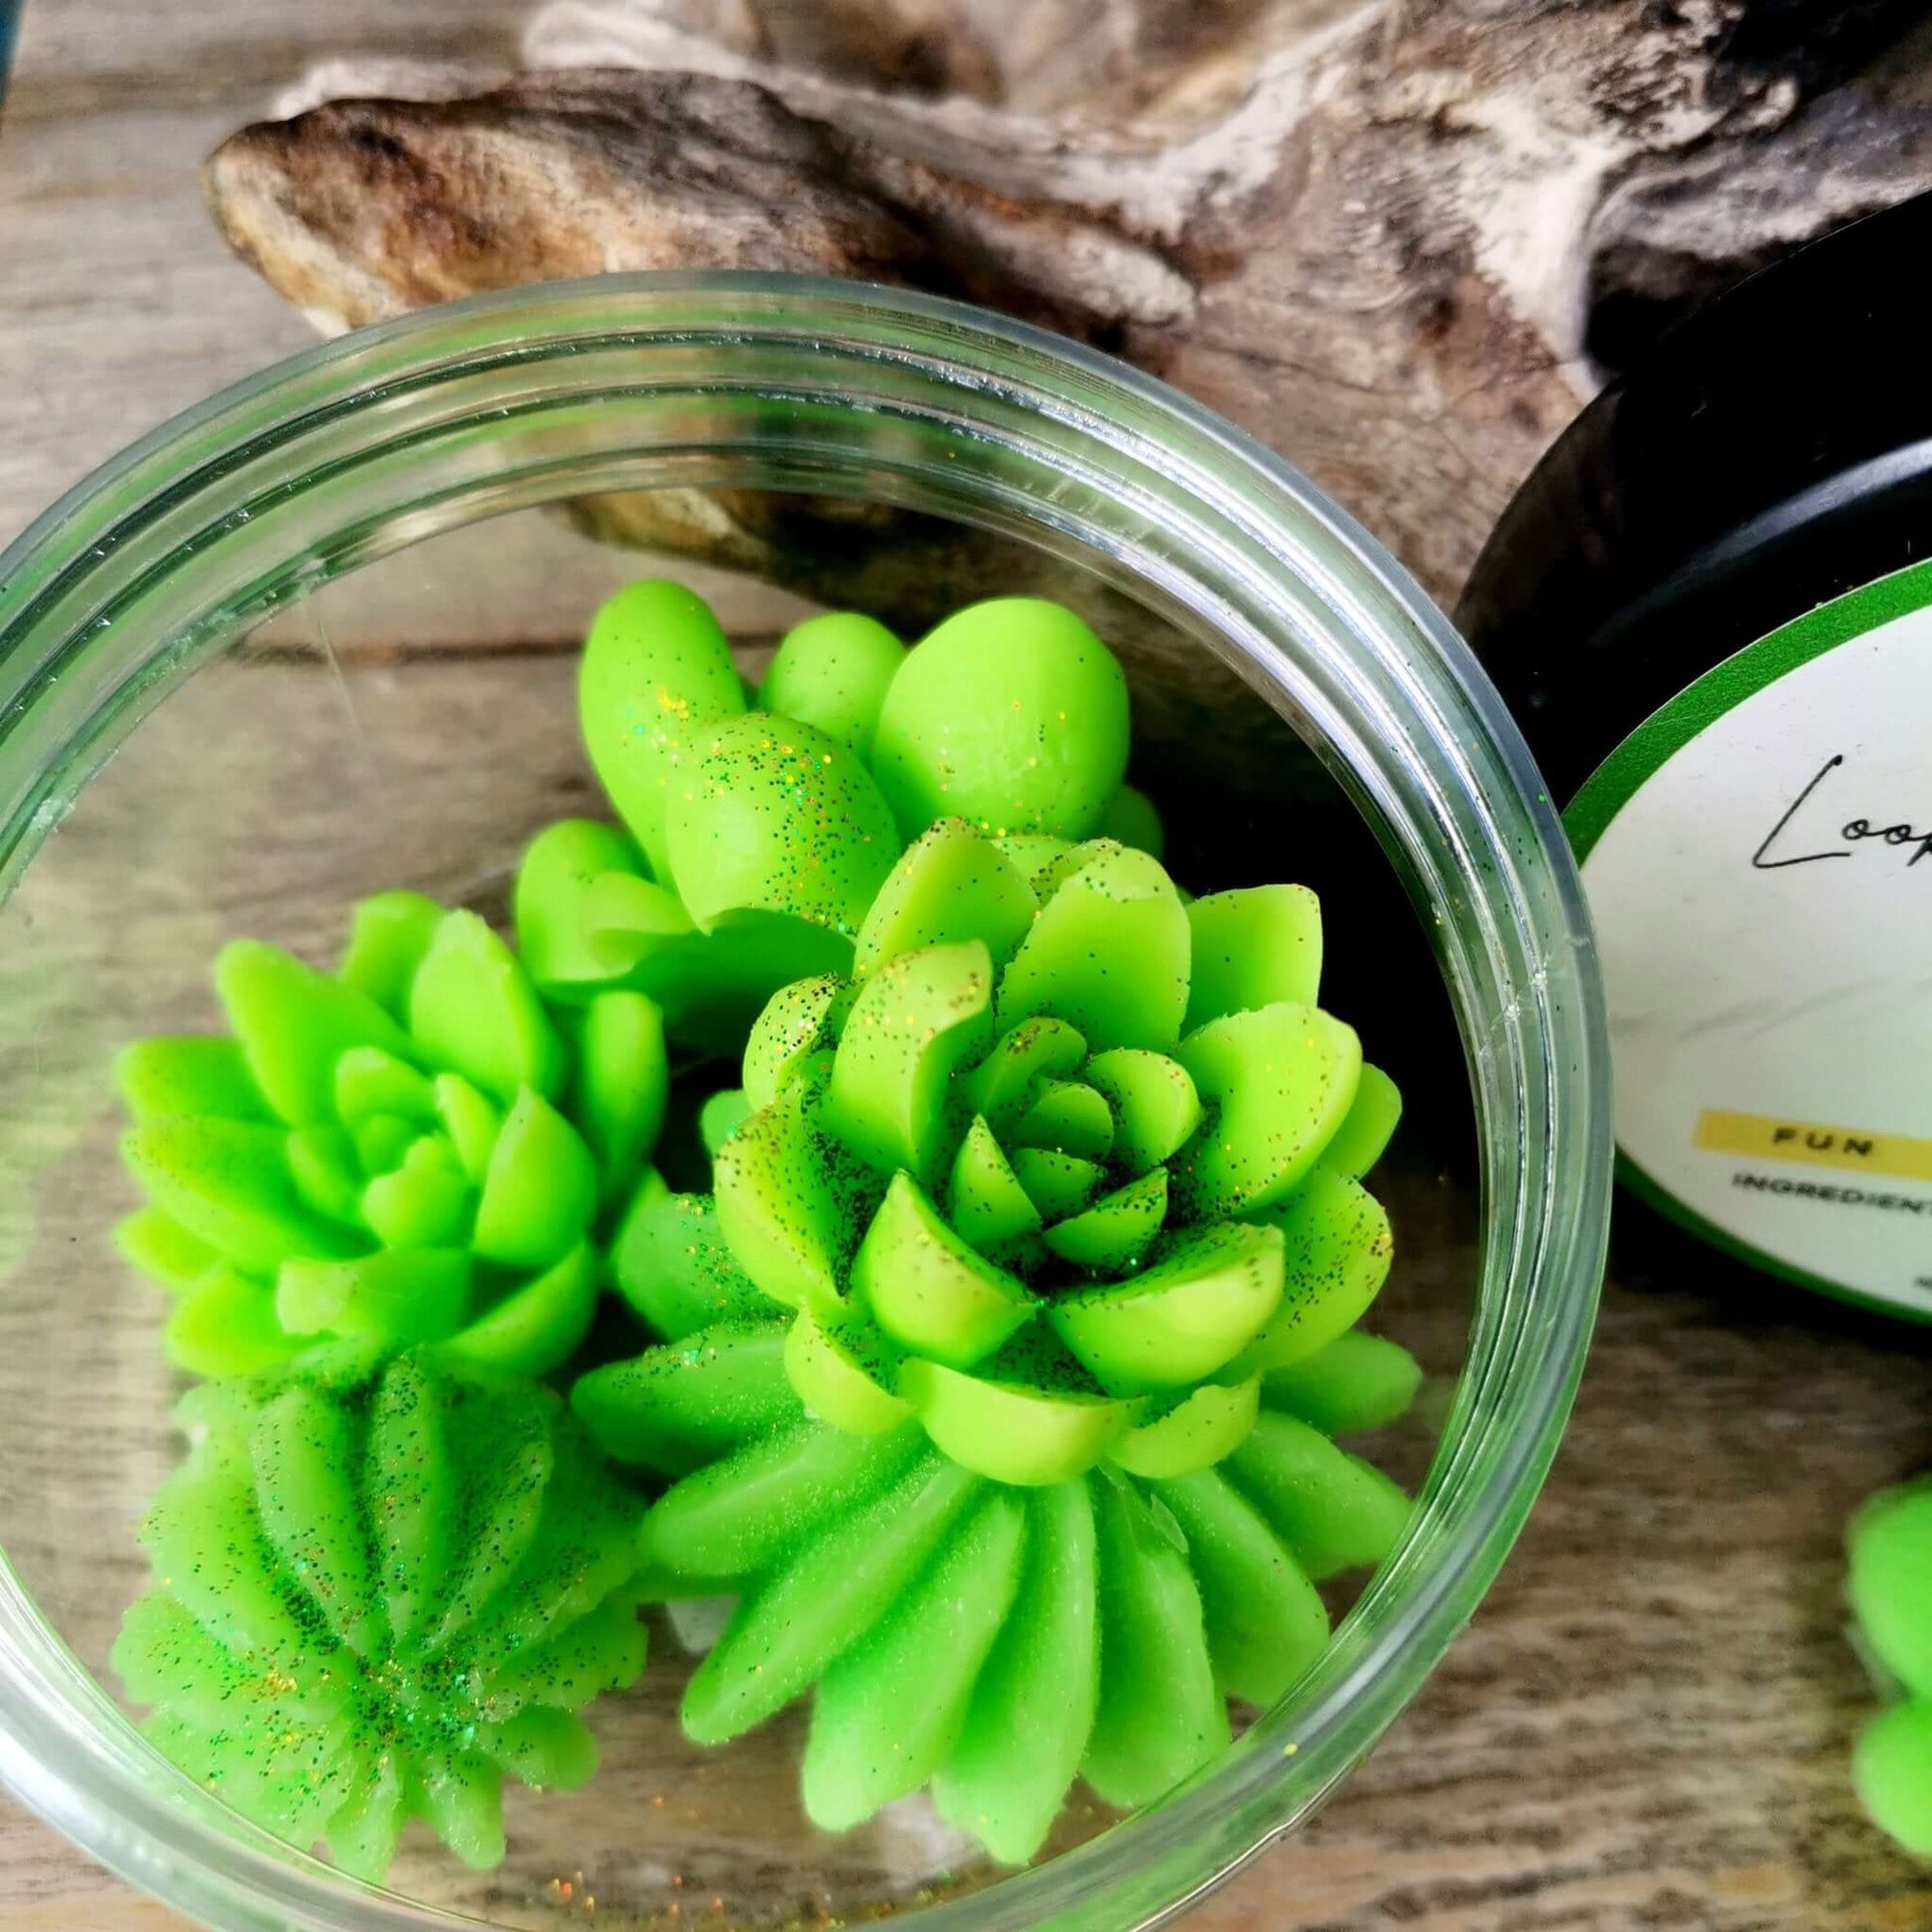 SOAP BAR: Looking Sharp Cactus Soaps in a Jar (Glycerine) - JUSTBLiSS Soap